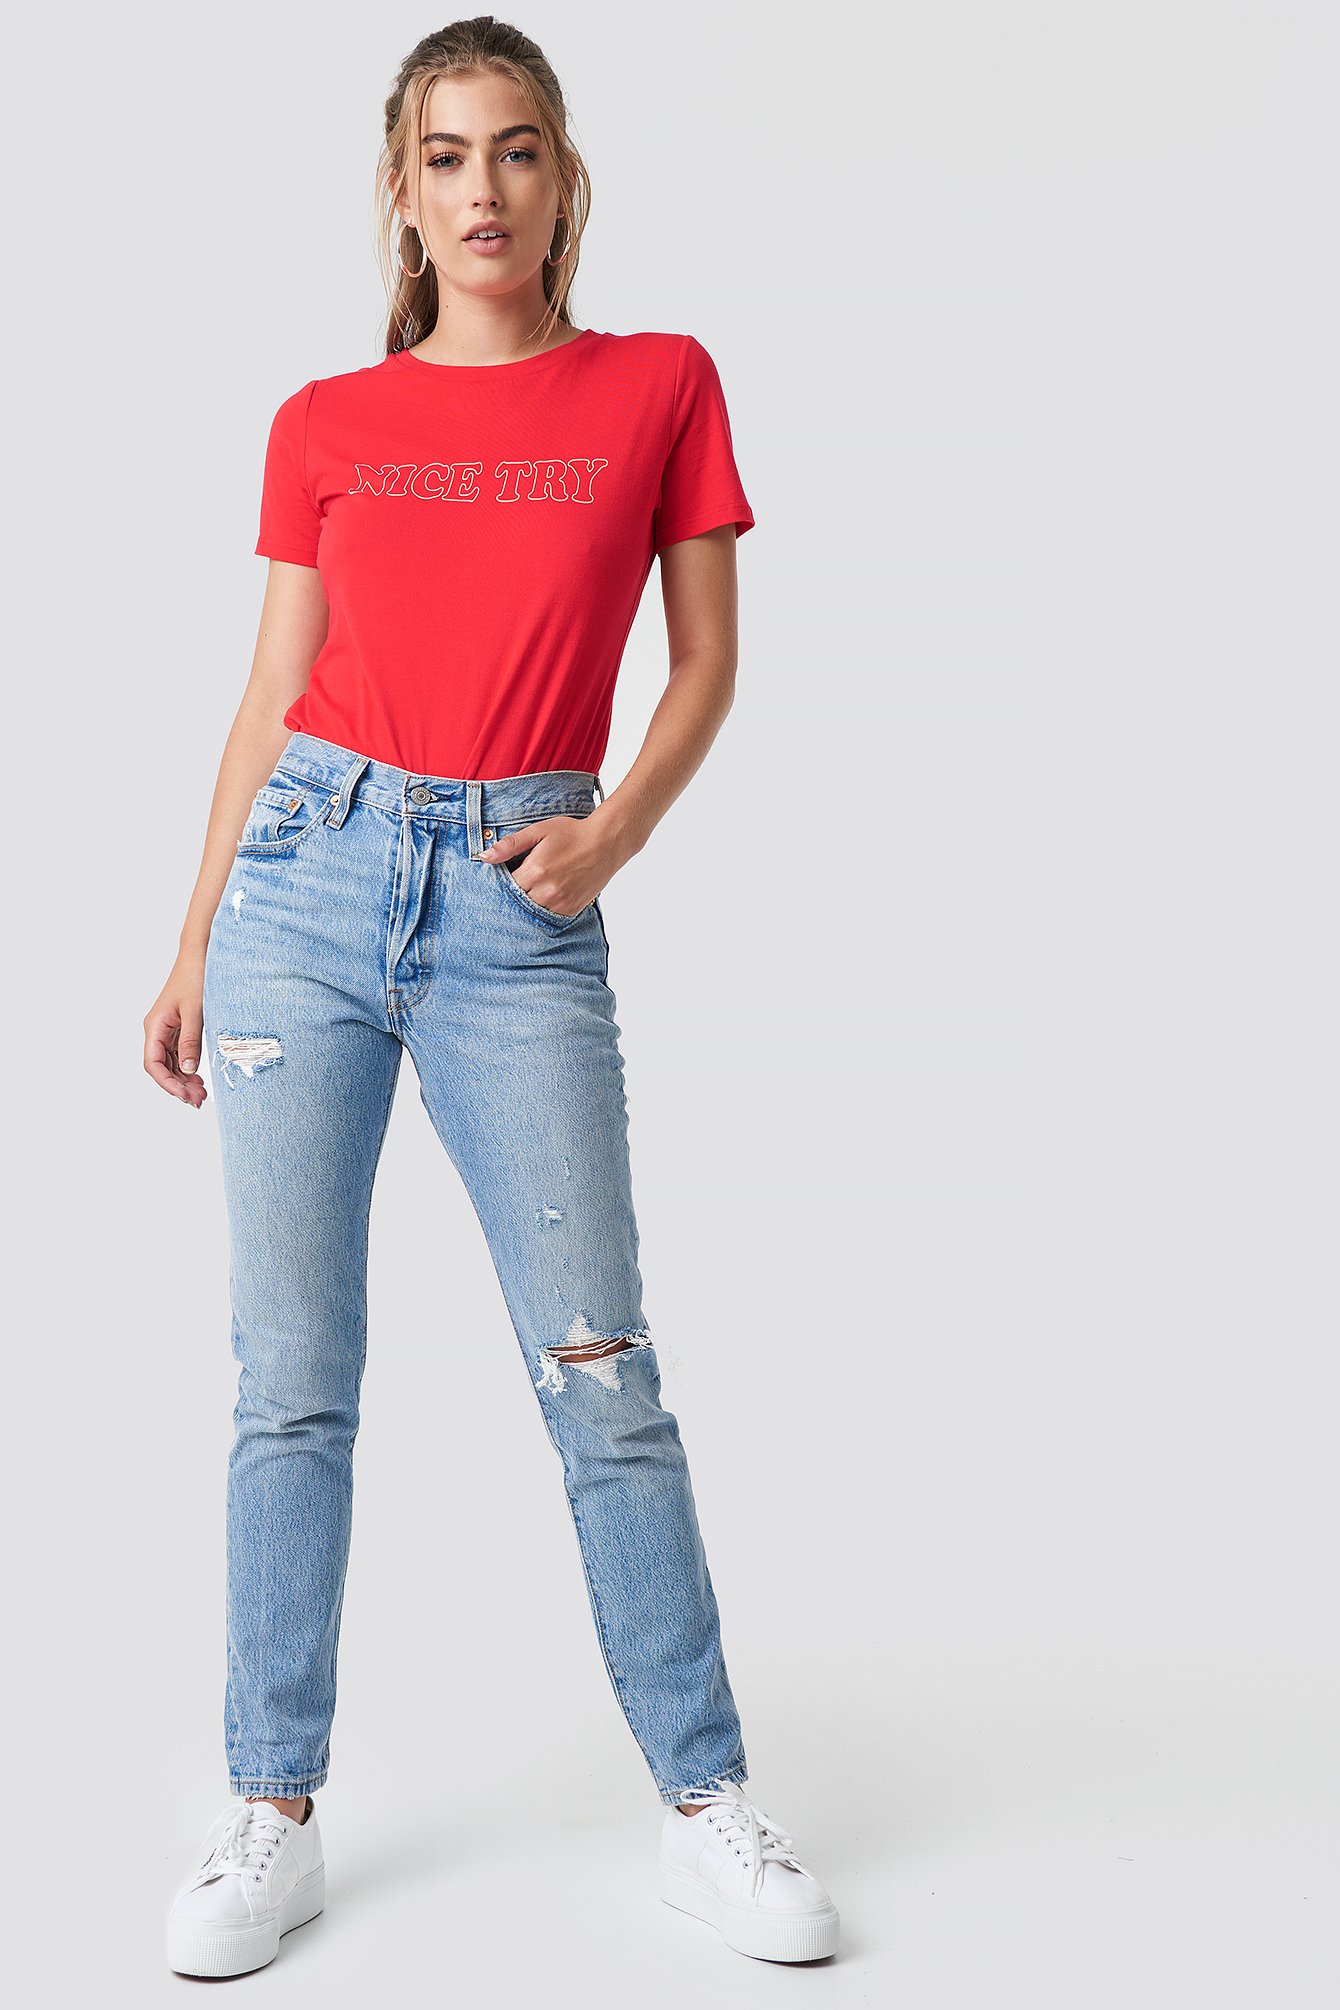 Can't Touch This Levi's 501 Skinny Jeans